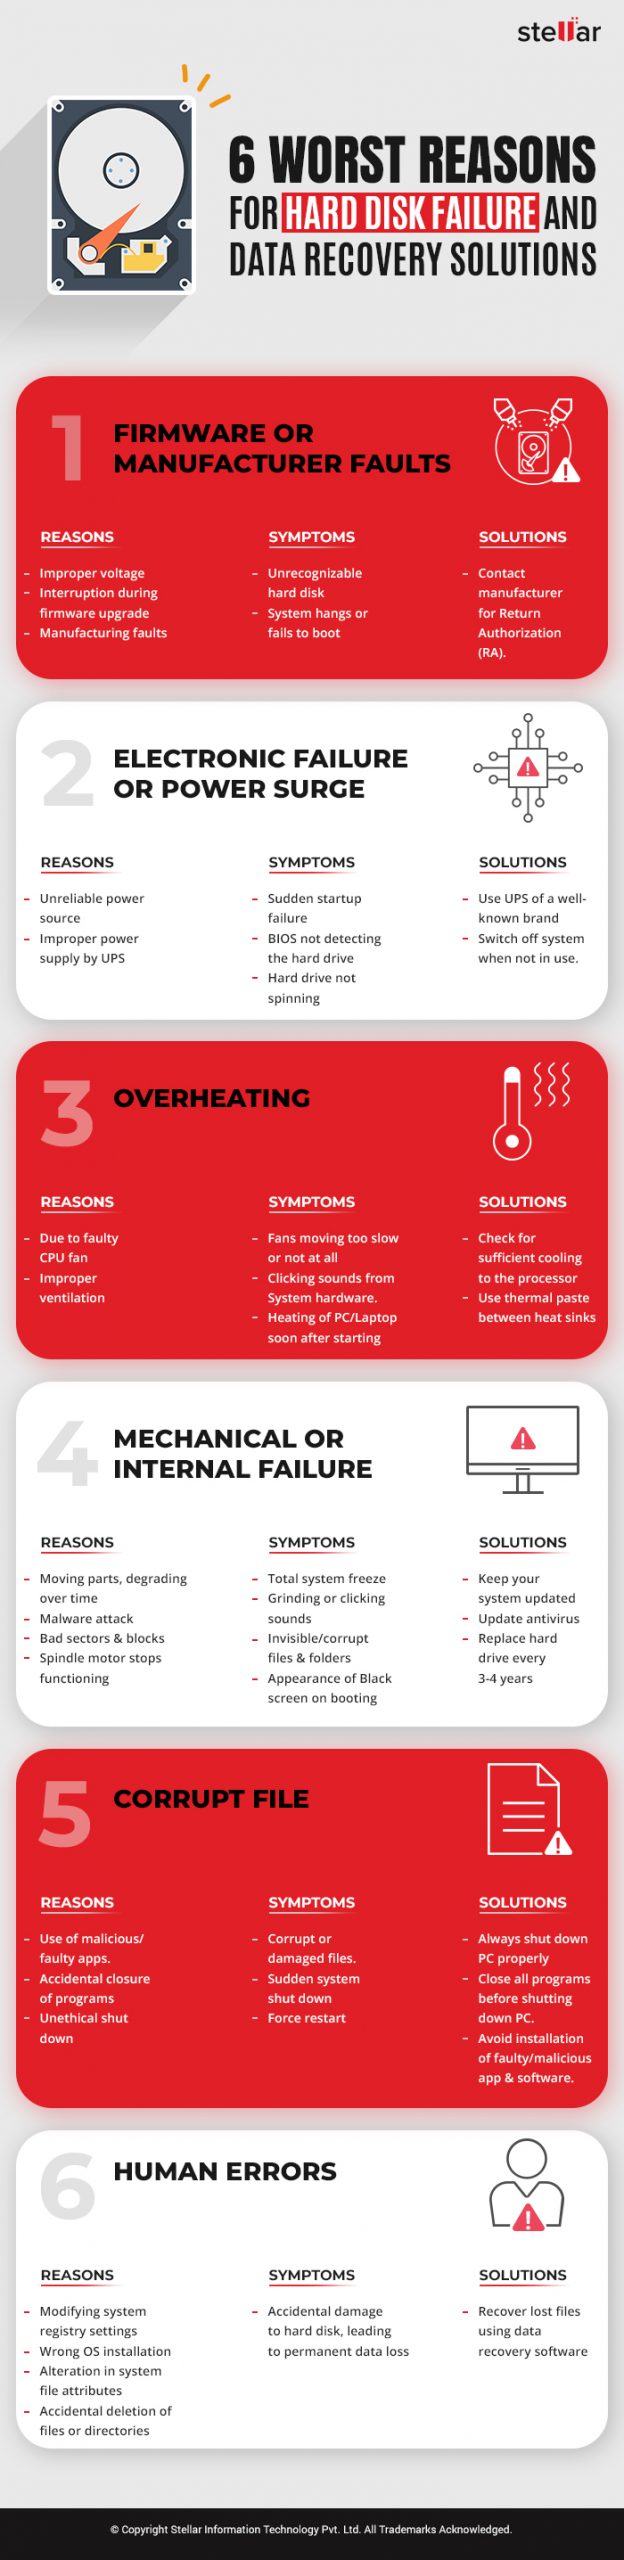 Info-graphic for 6 worst reasons for hard disk failure with solutions.